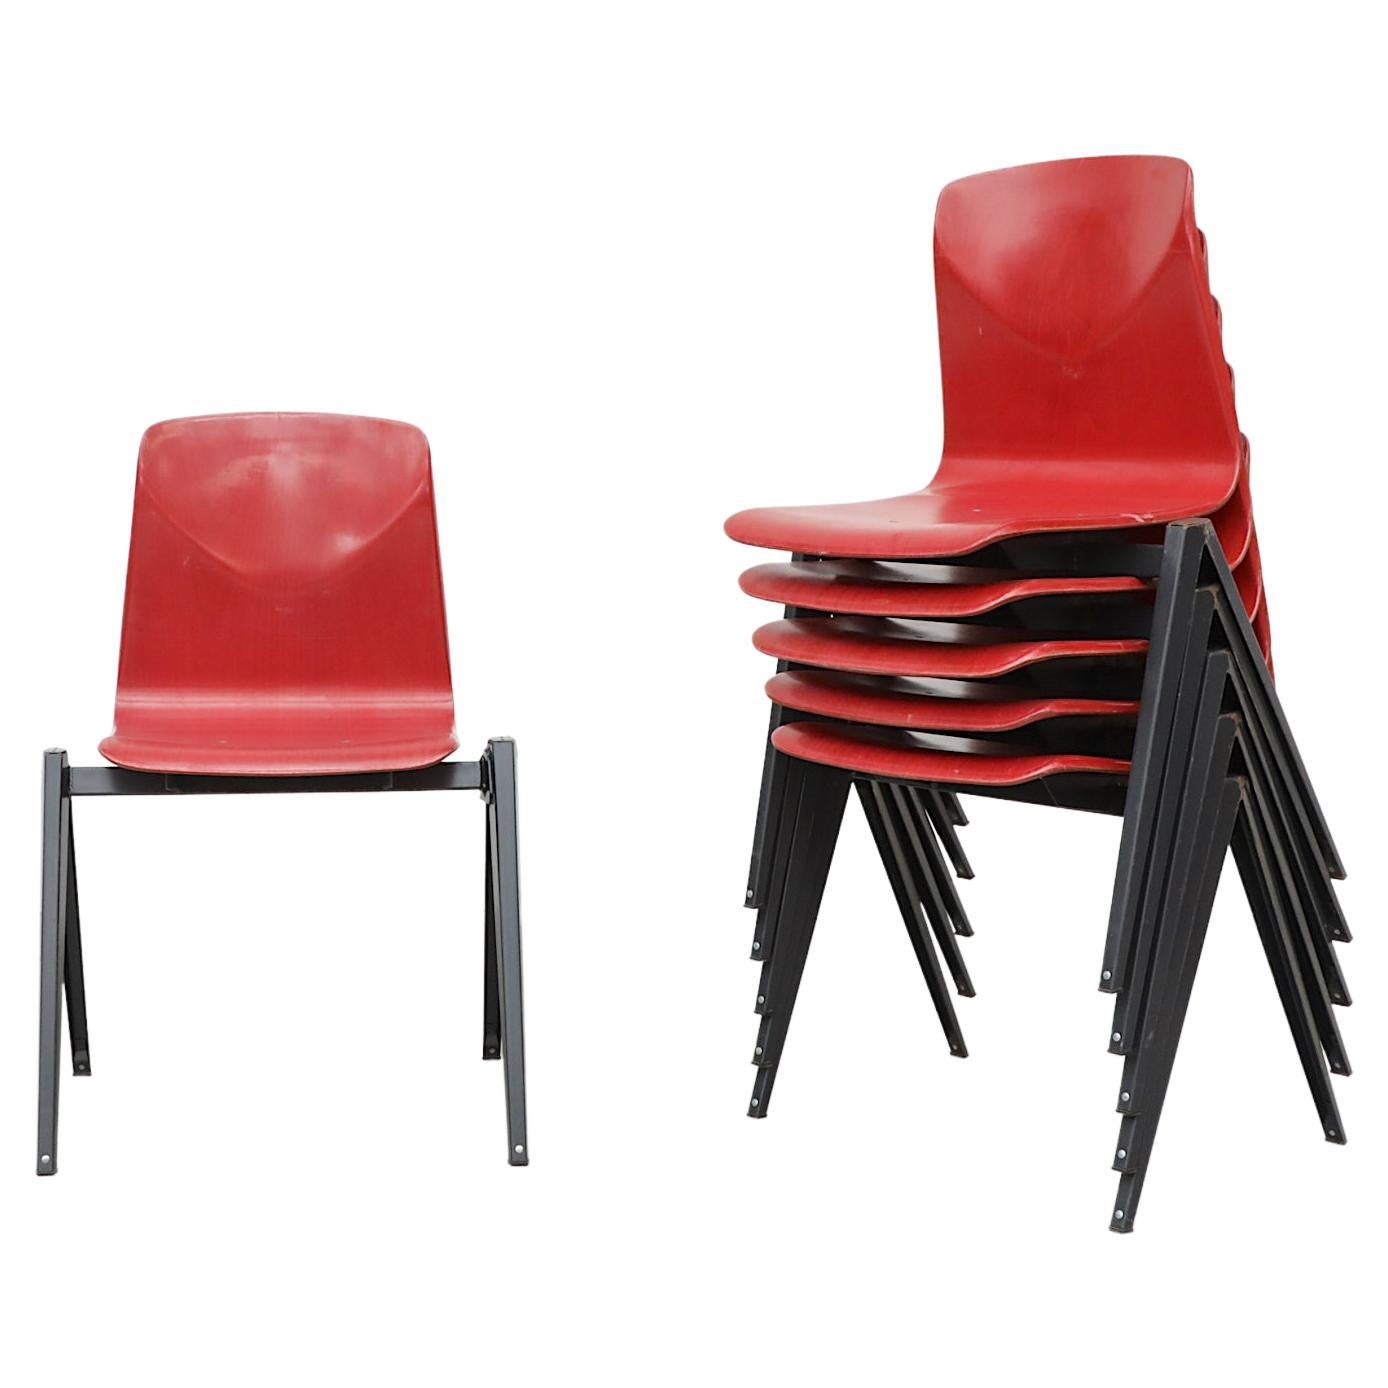 Rare Red Prouve Style Stacking Chairs with Dark Metal Compass Legs For Sale